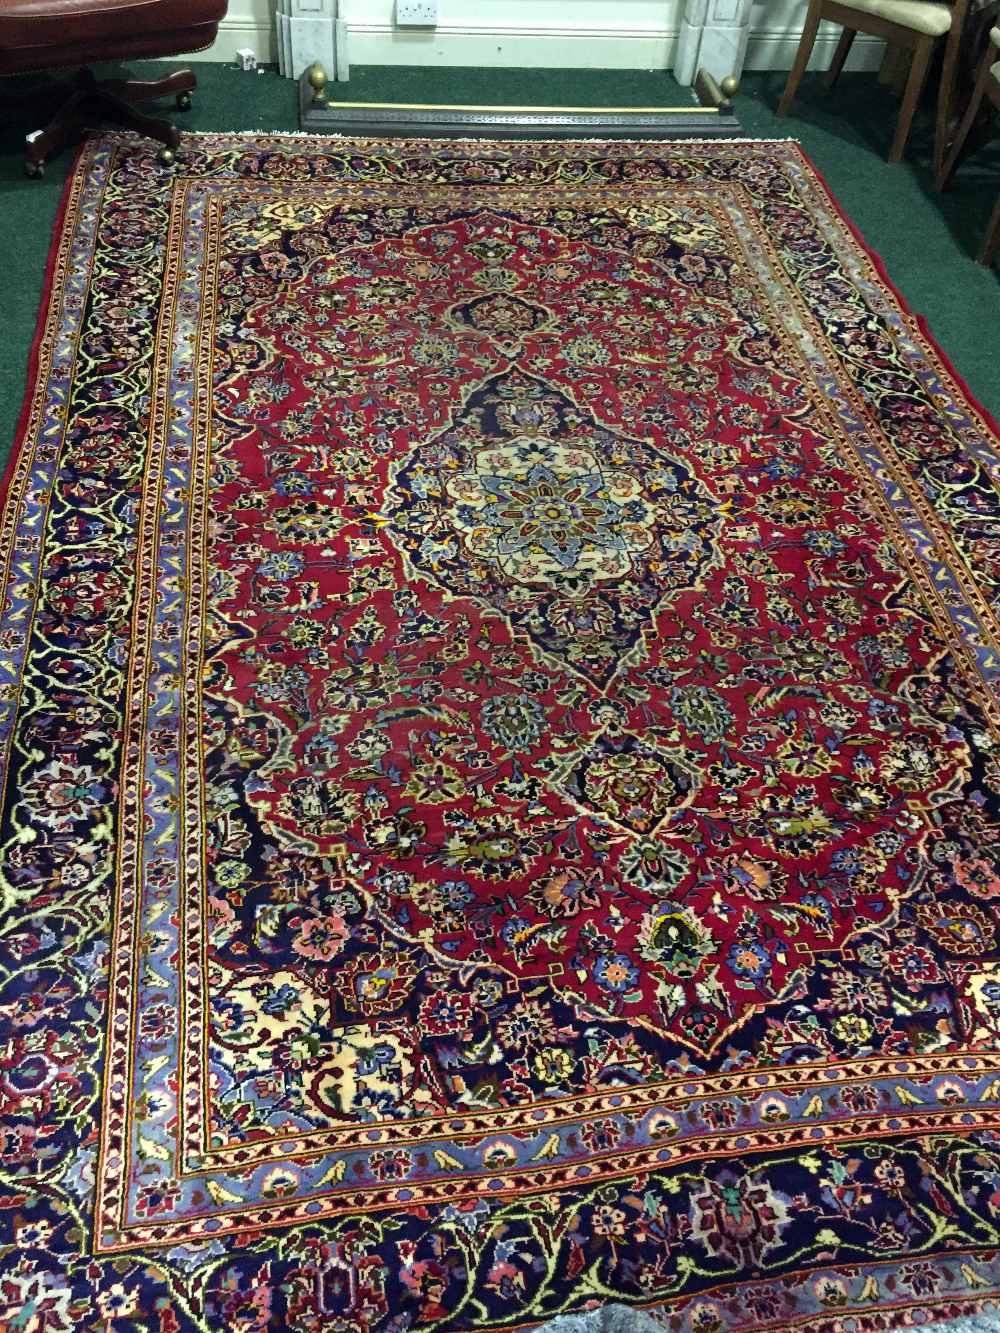 A PERSIAN KASHAN RUG, hand-knotted and woven, the design is inspired by old 16th century design